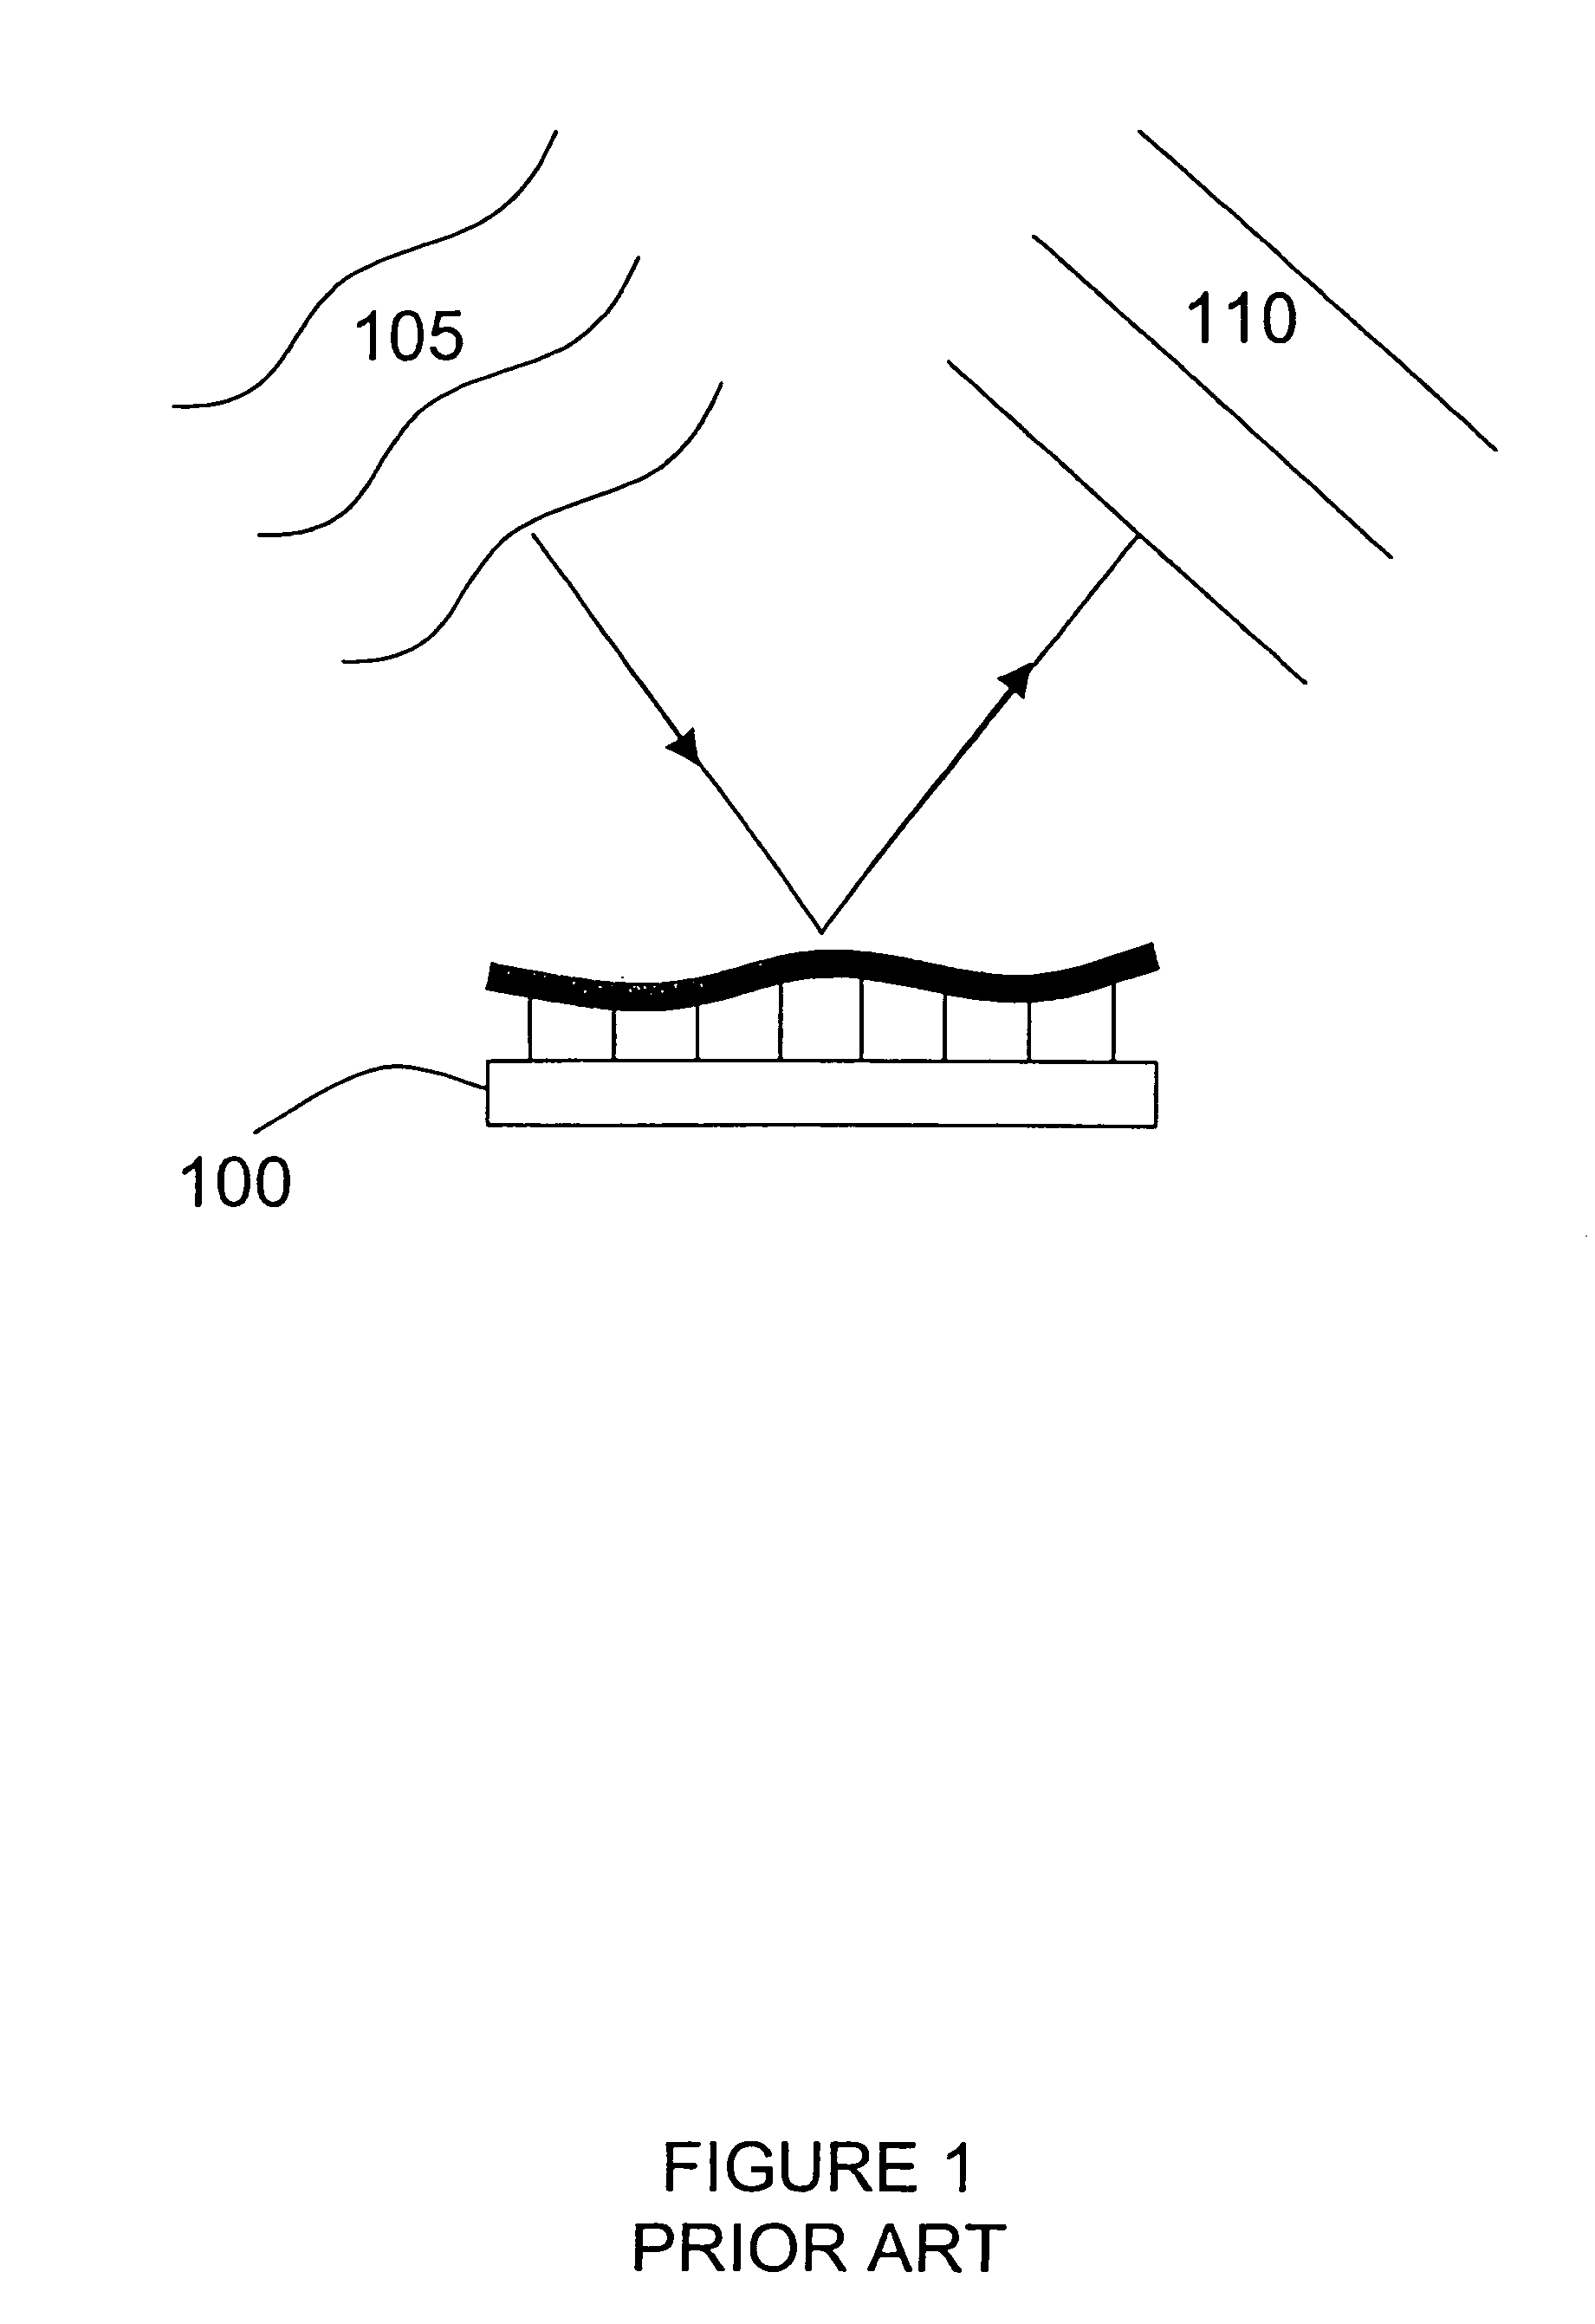 Micromechanical actuator with asymmetrically shaped electrodes